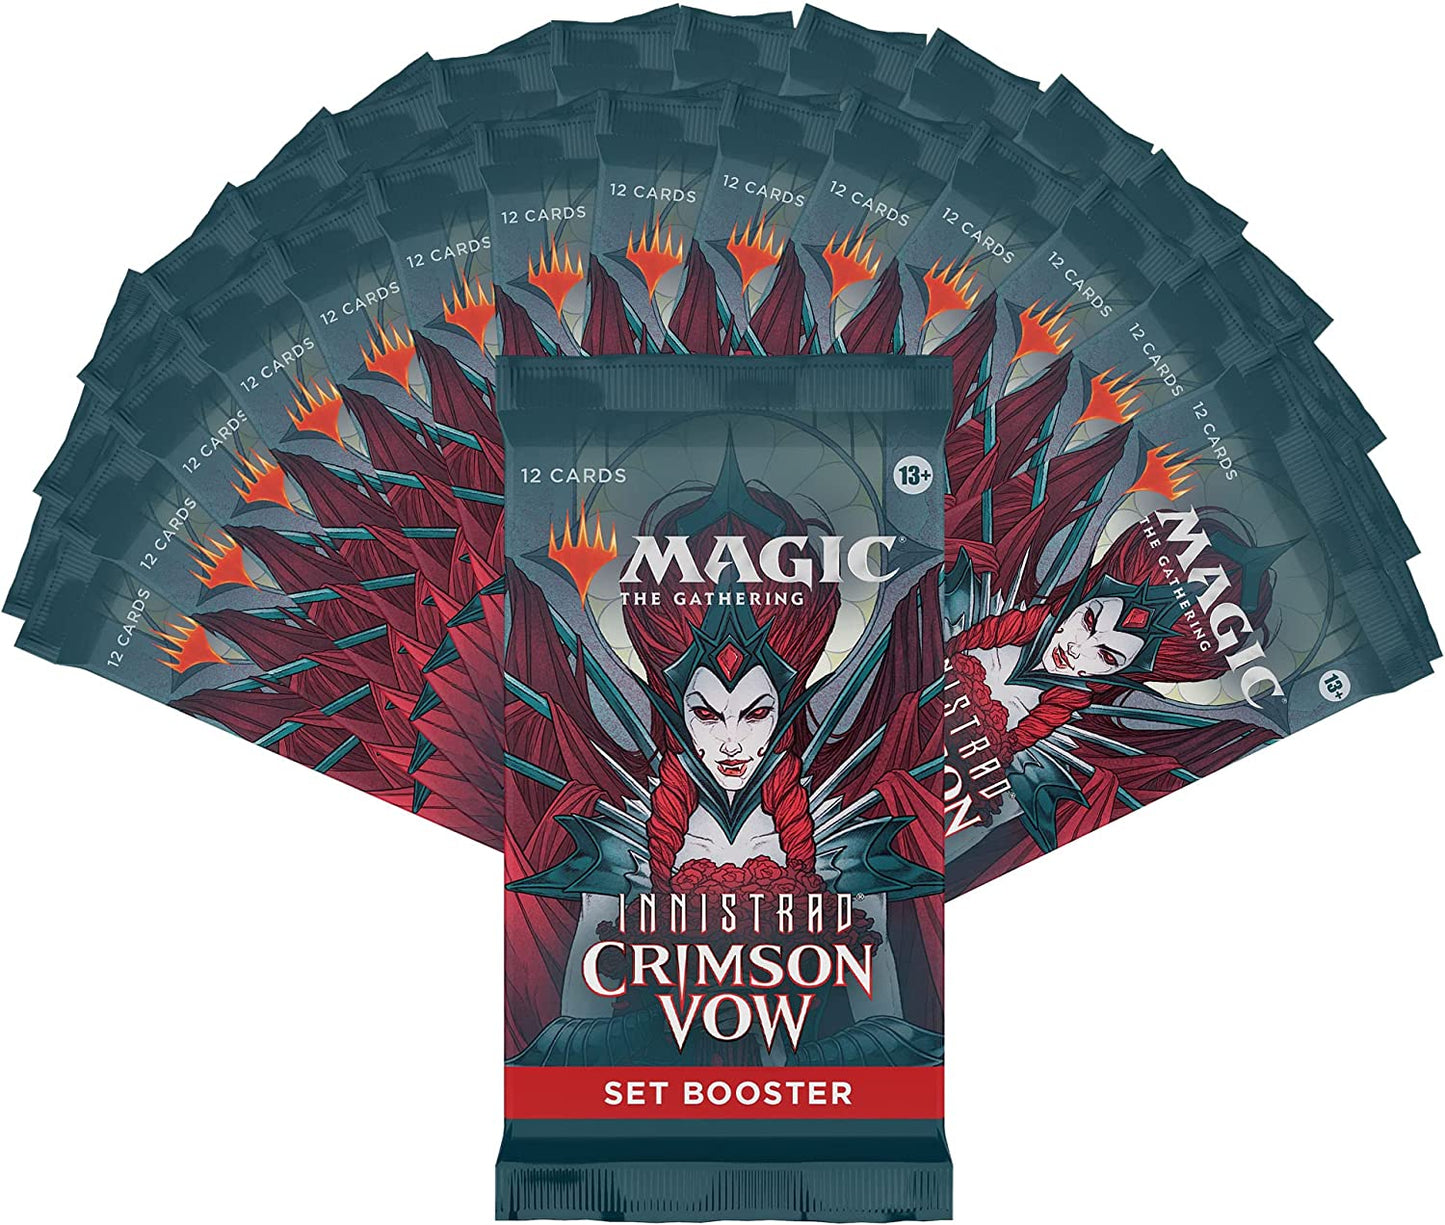 Magic: The Gathering - Innistrad Crimson Vow - Set Booster